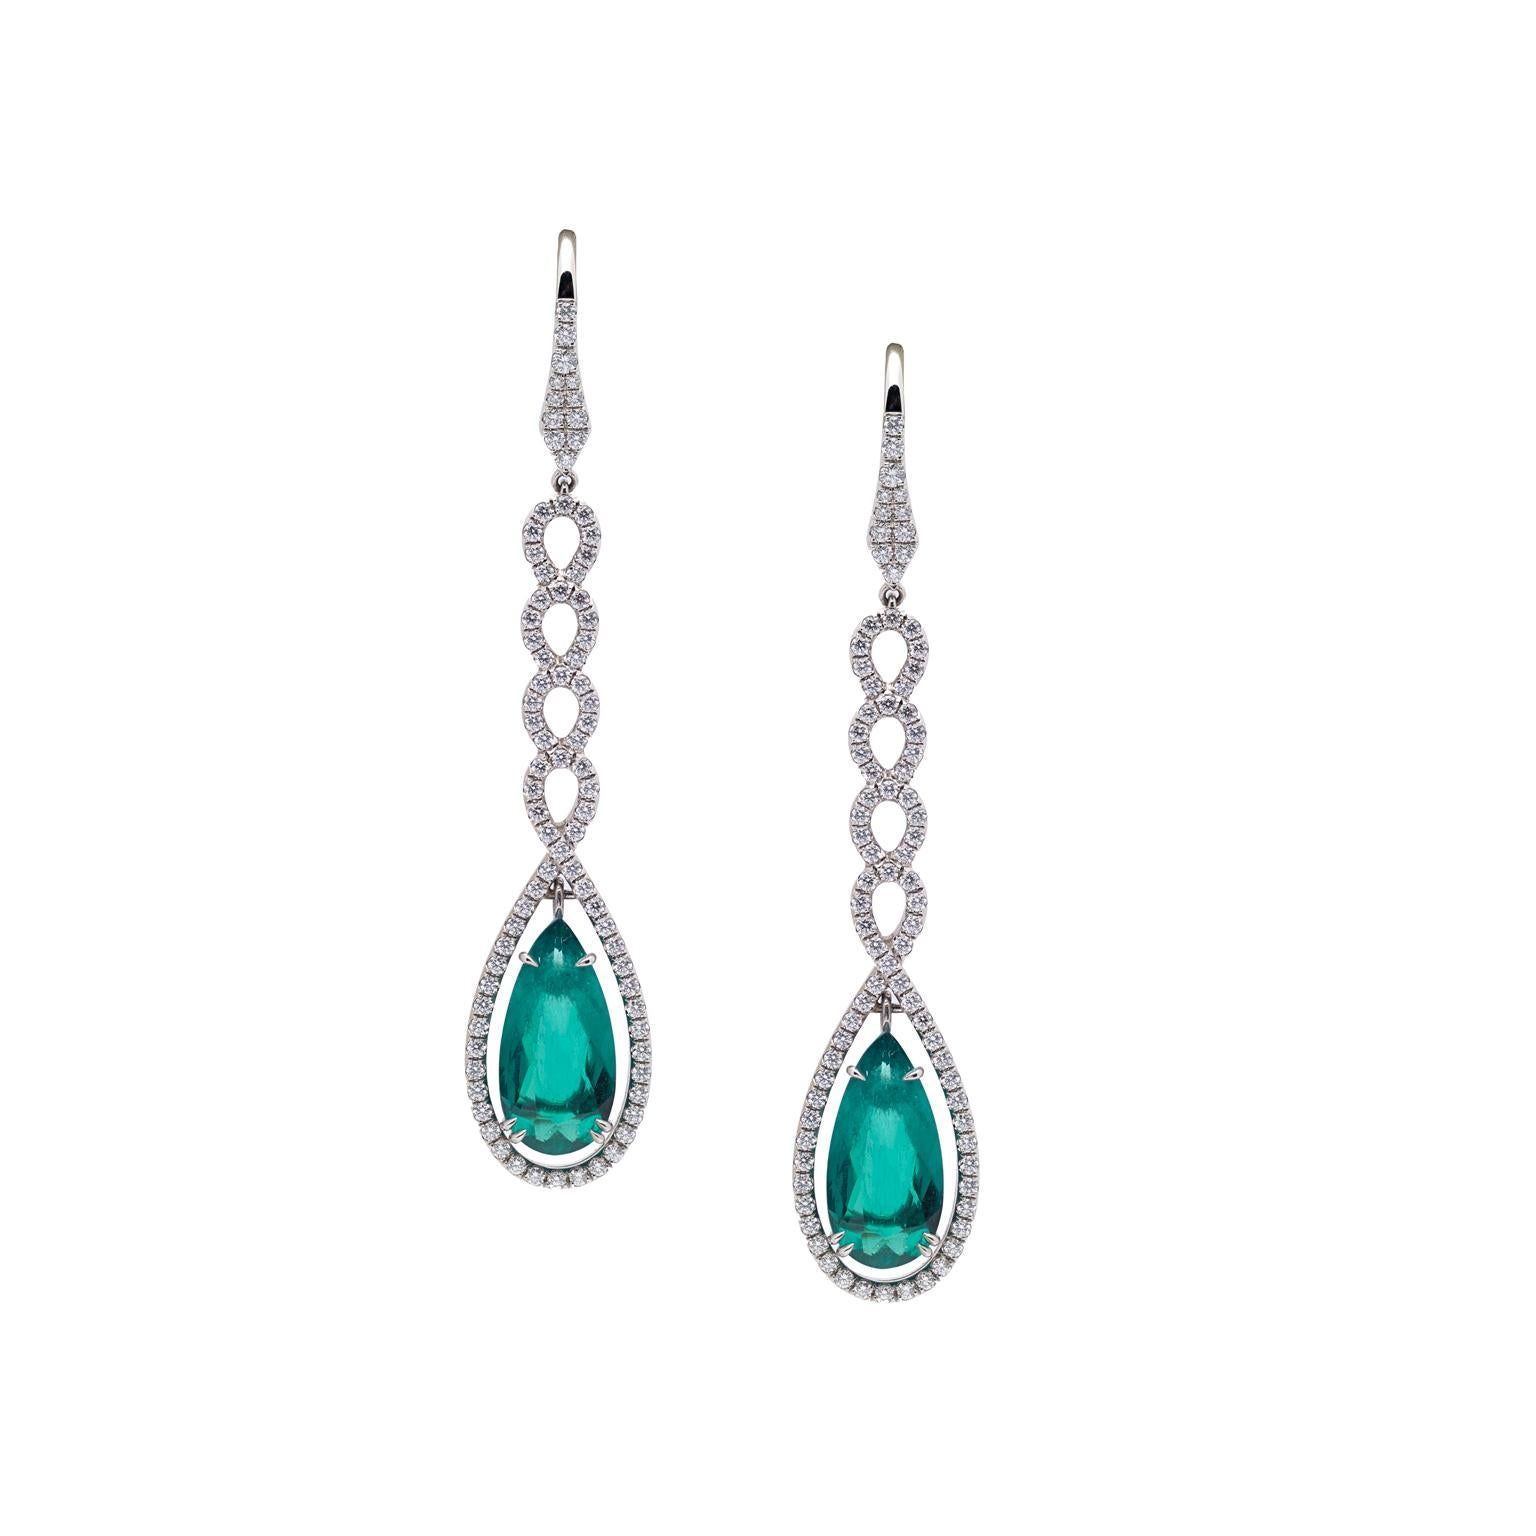 Pear Cut Certified Natural Colombian Emeralds 3.97 Carats Platinum Earrings For Sale